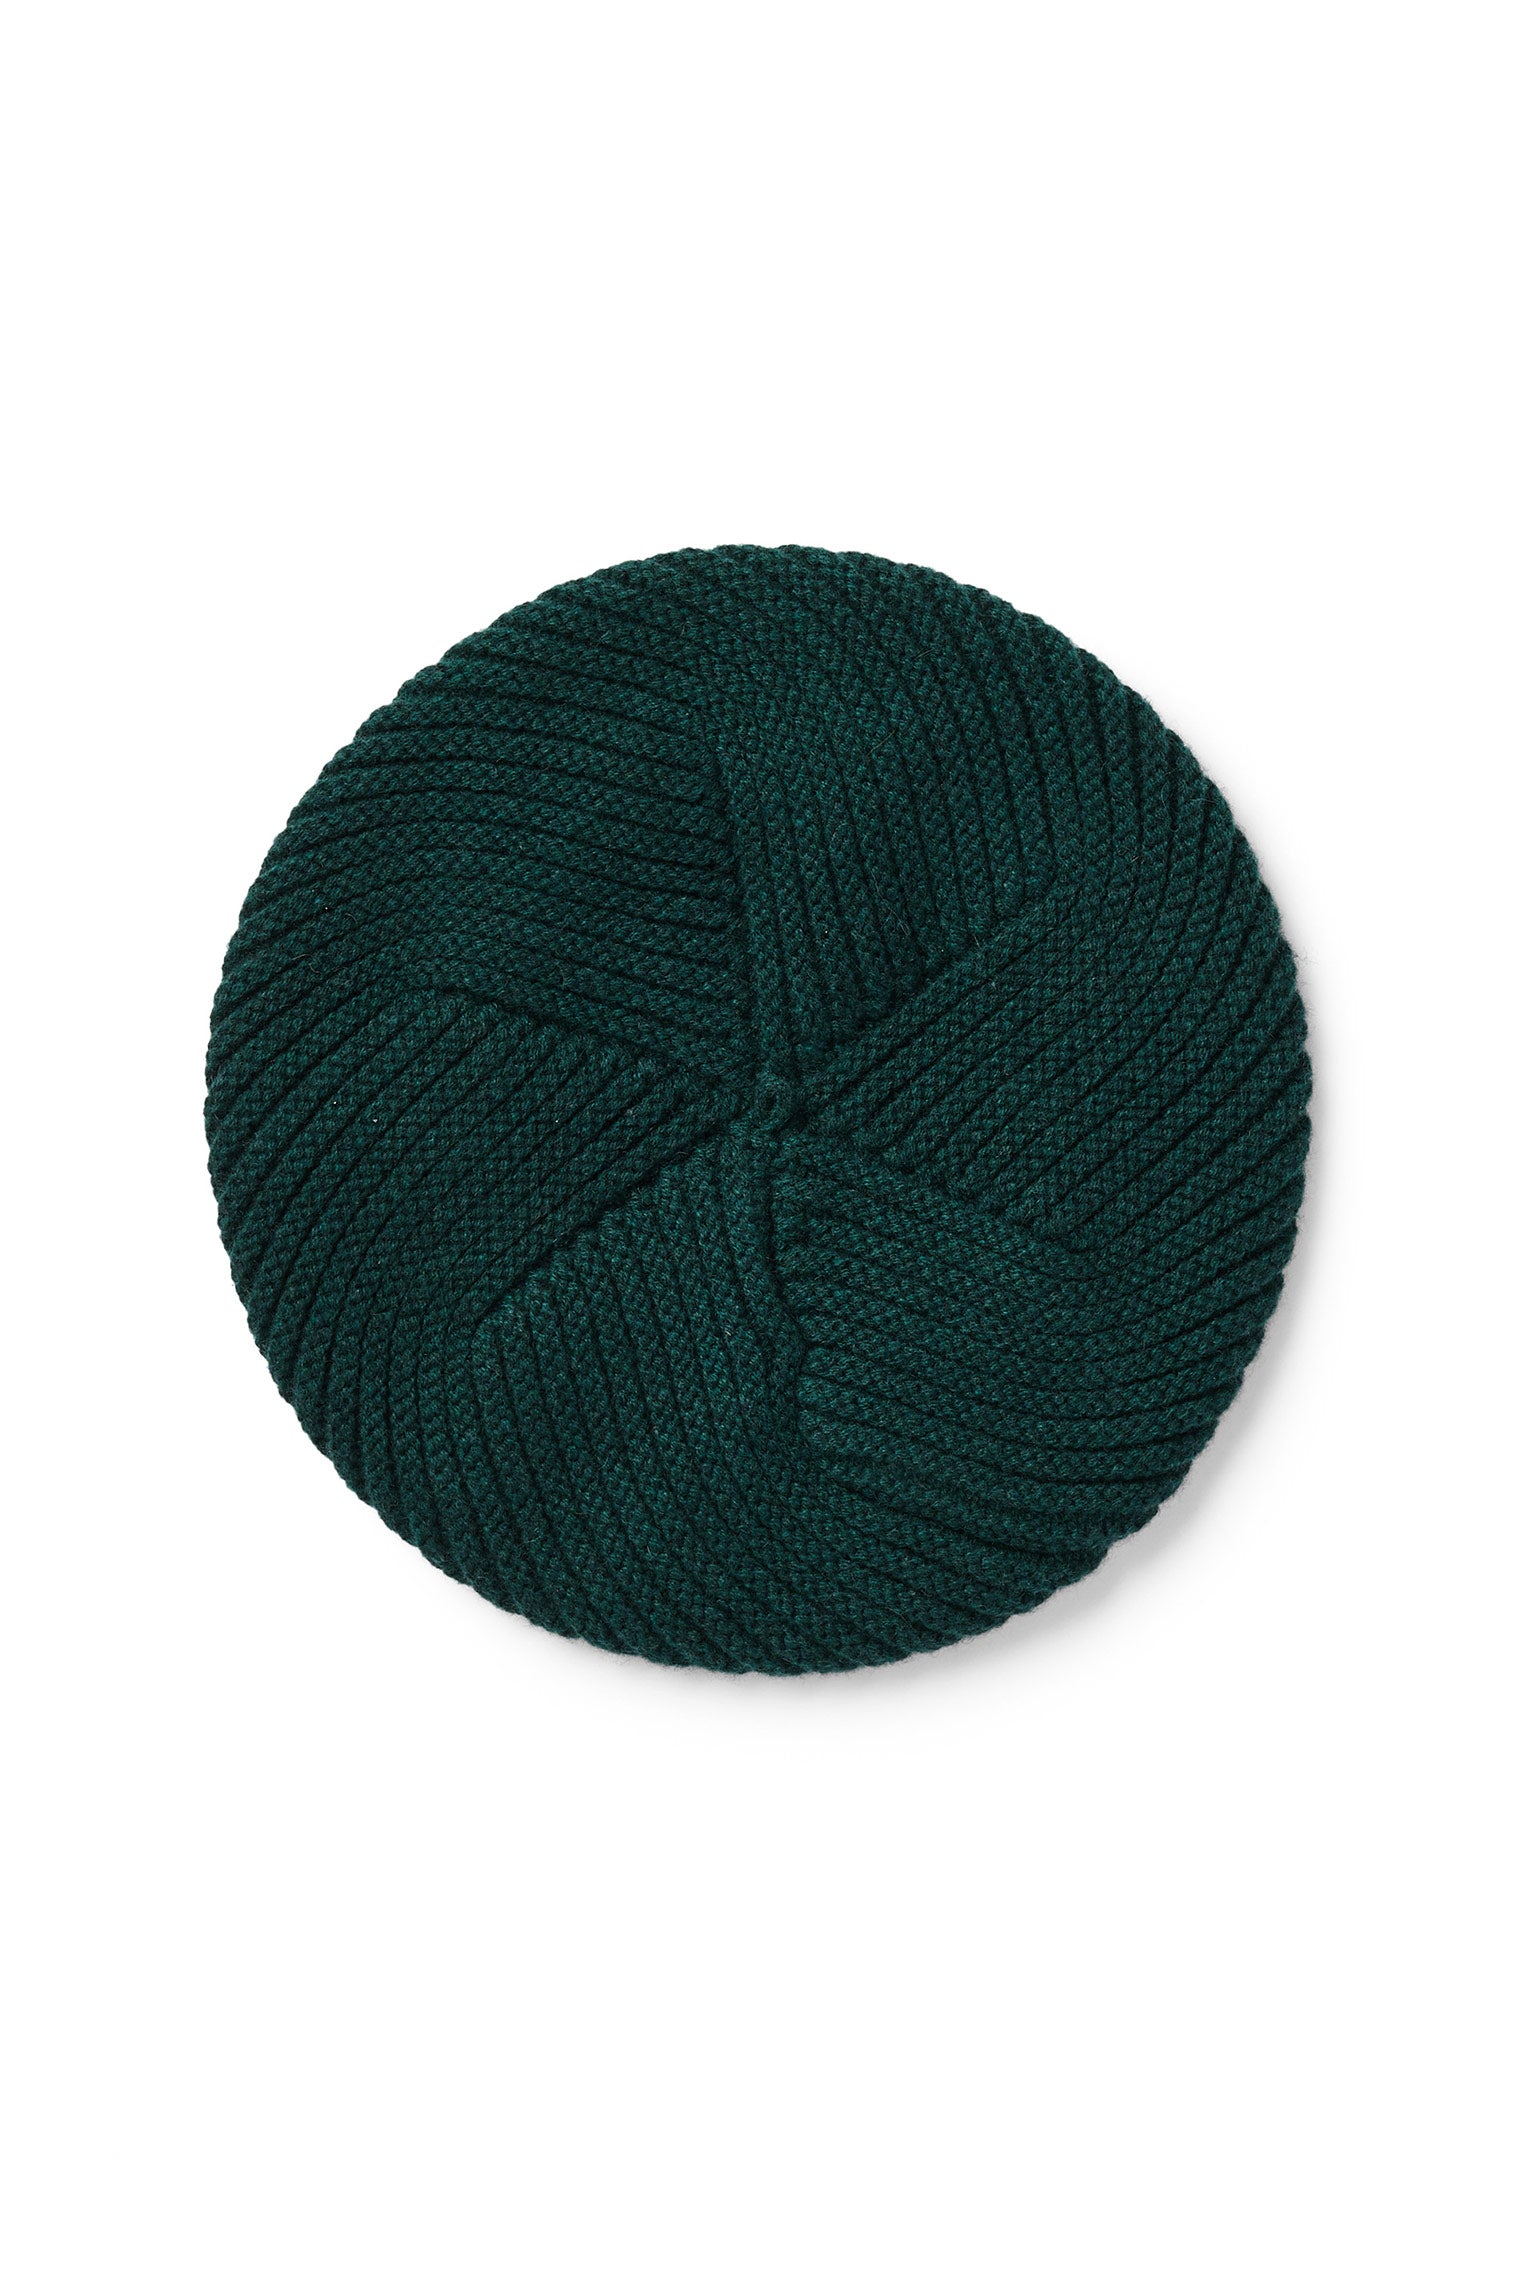 Green Knitted Cashmere Beret - Products - Lock & Co. Hatters London UK